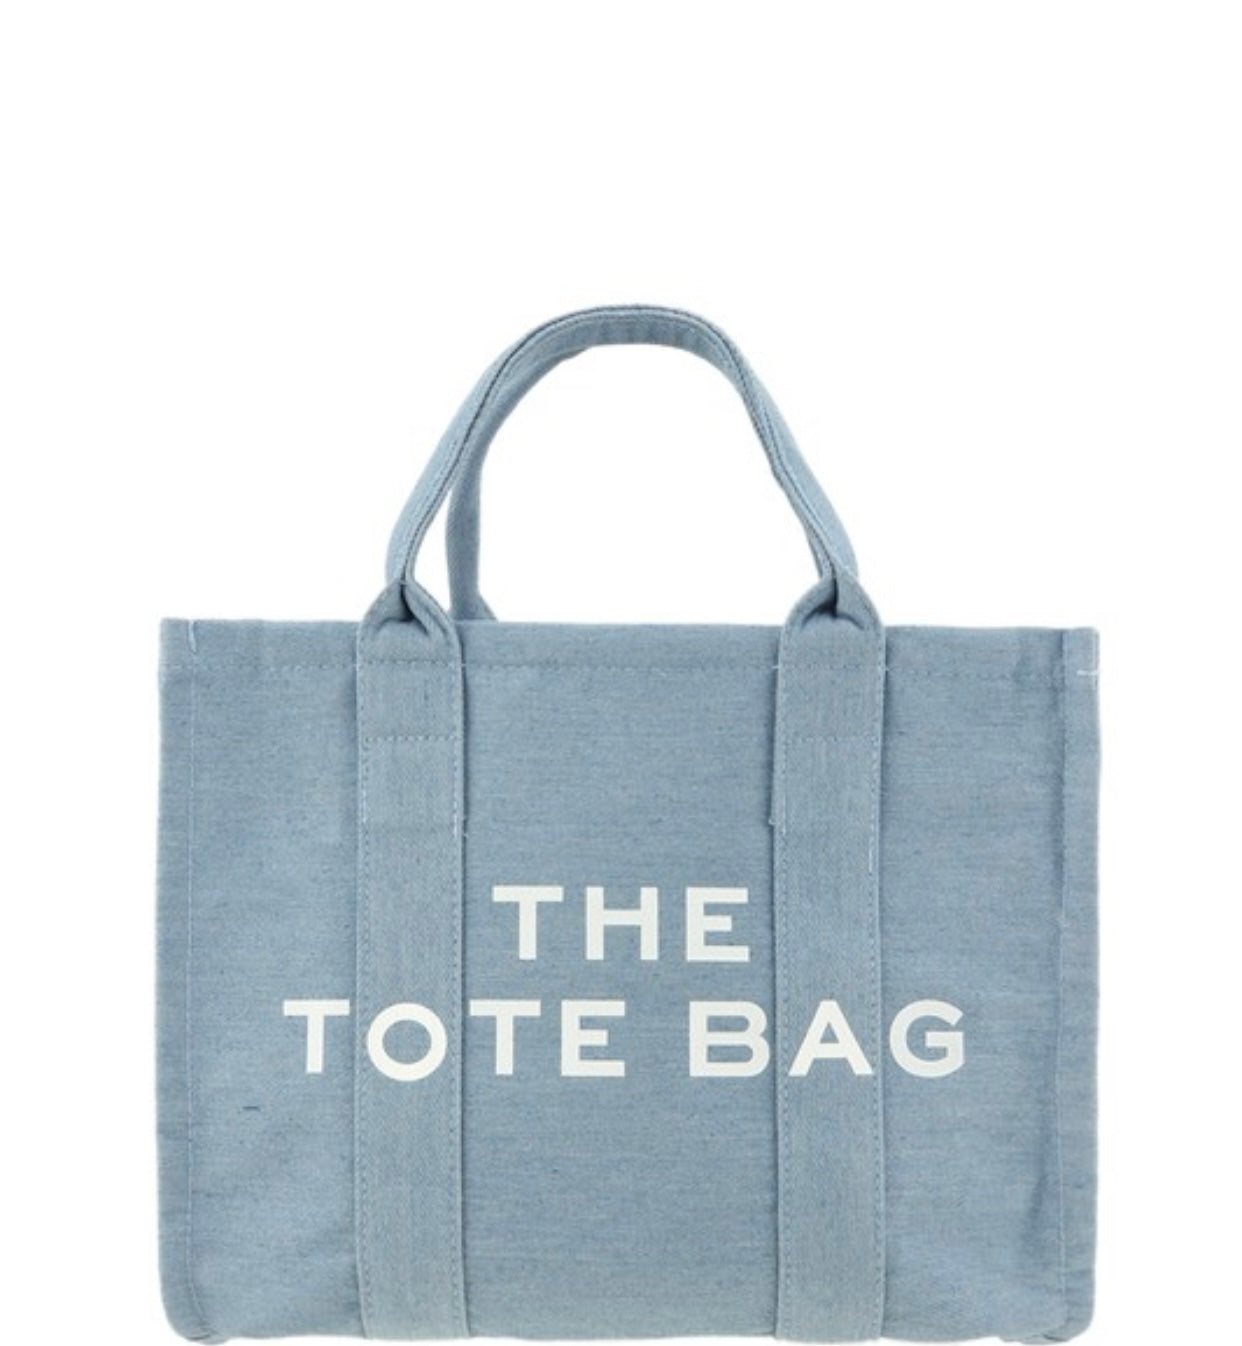 The Canvas Crossbody Tote Bag